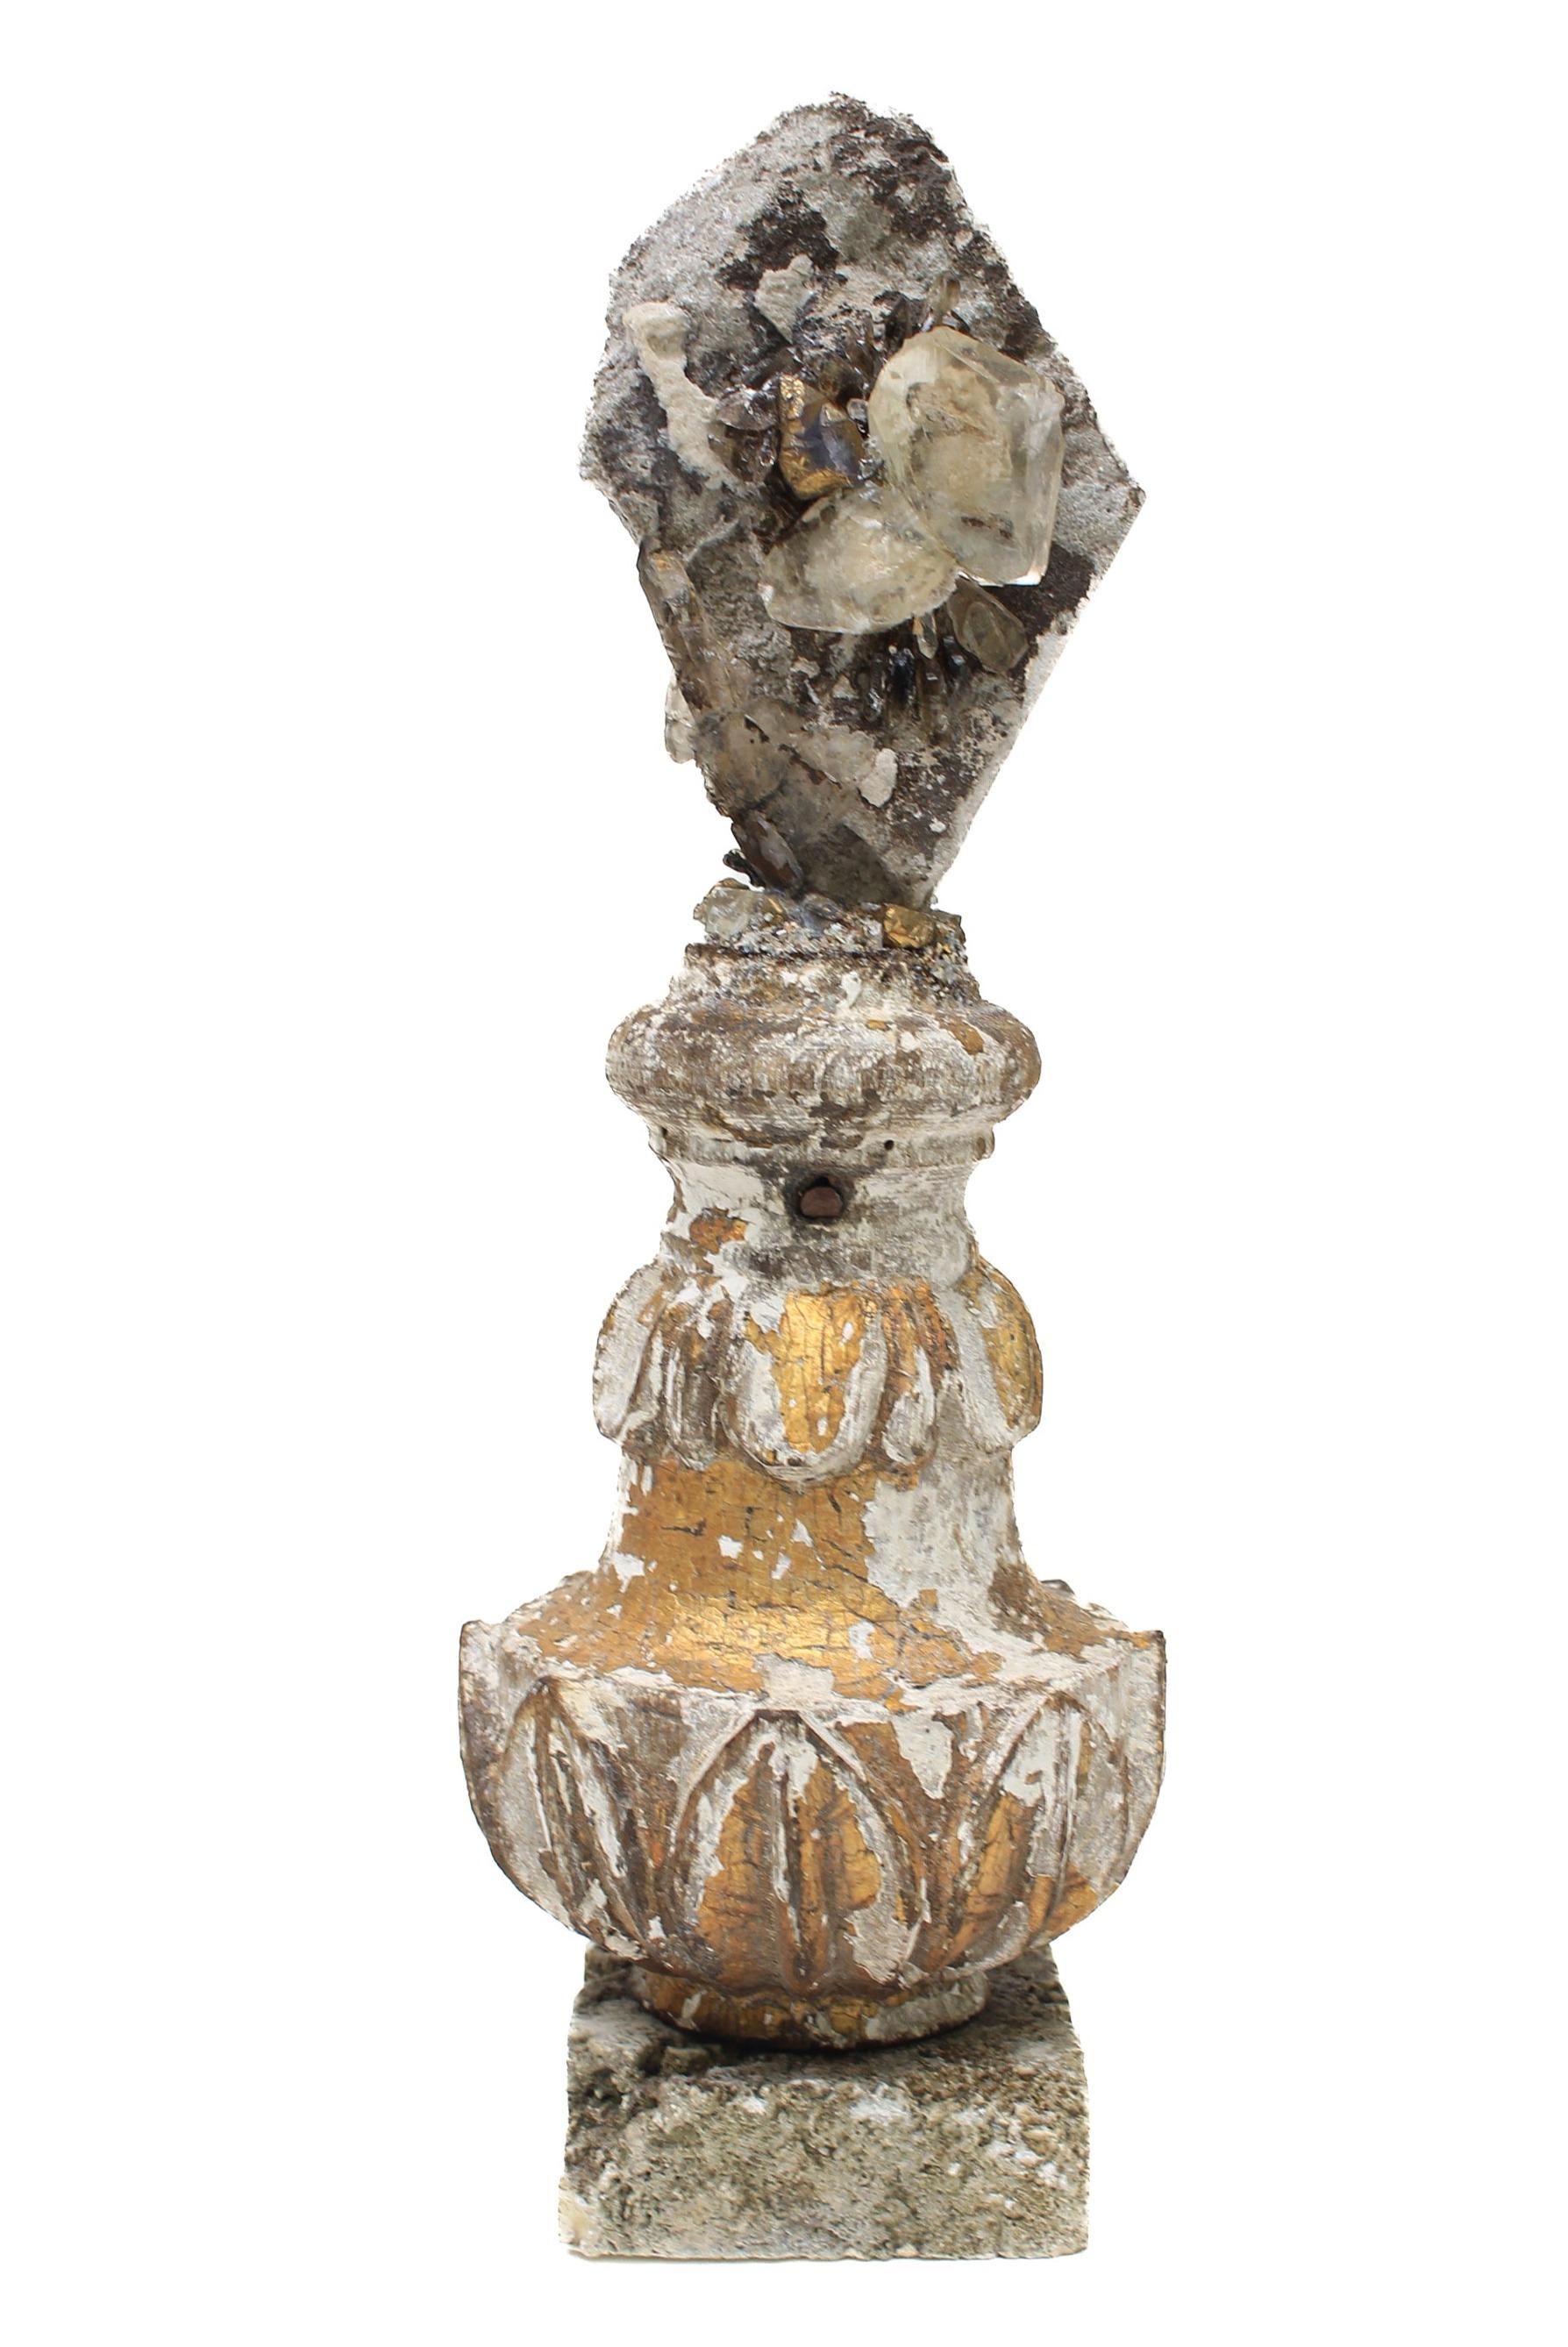 17th century Italian gold leaf fragment with calcite crystals in a rock matrix with gold leaf crystal quartz and mounted on a rock coral base.

This fragment was originally part of a candlestick from a church in Italy. The calcite crystal in matrix